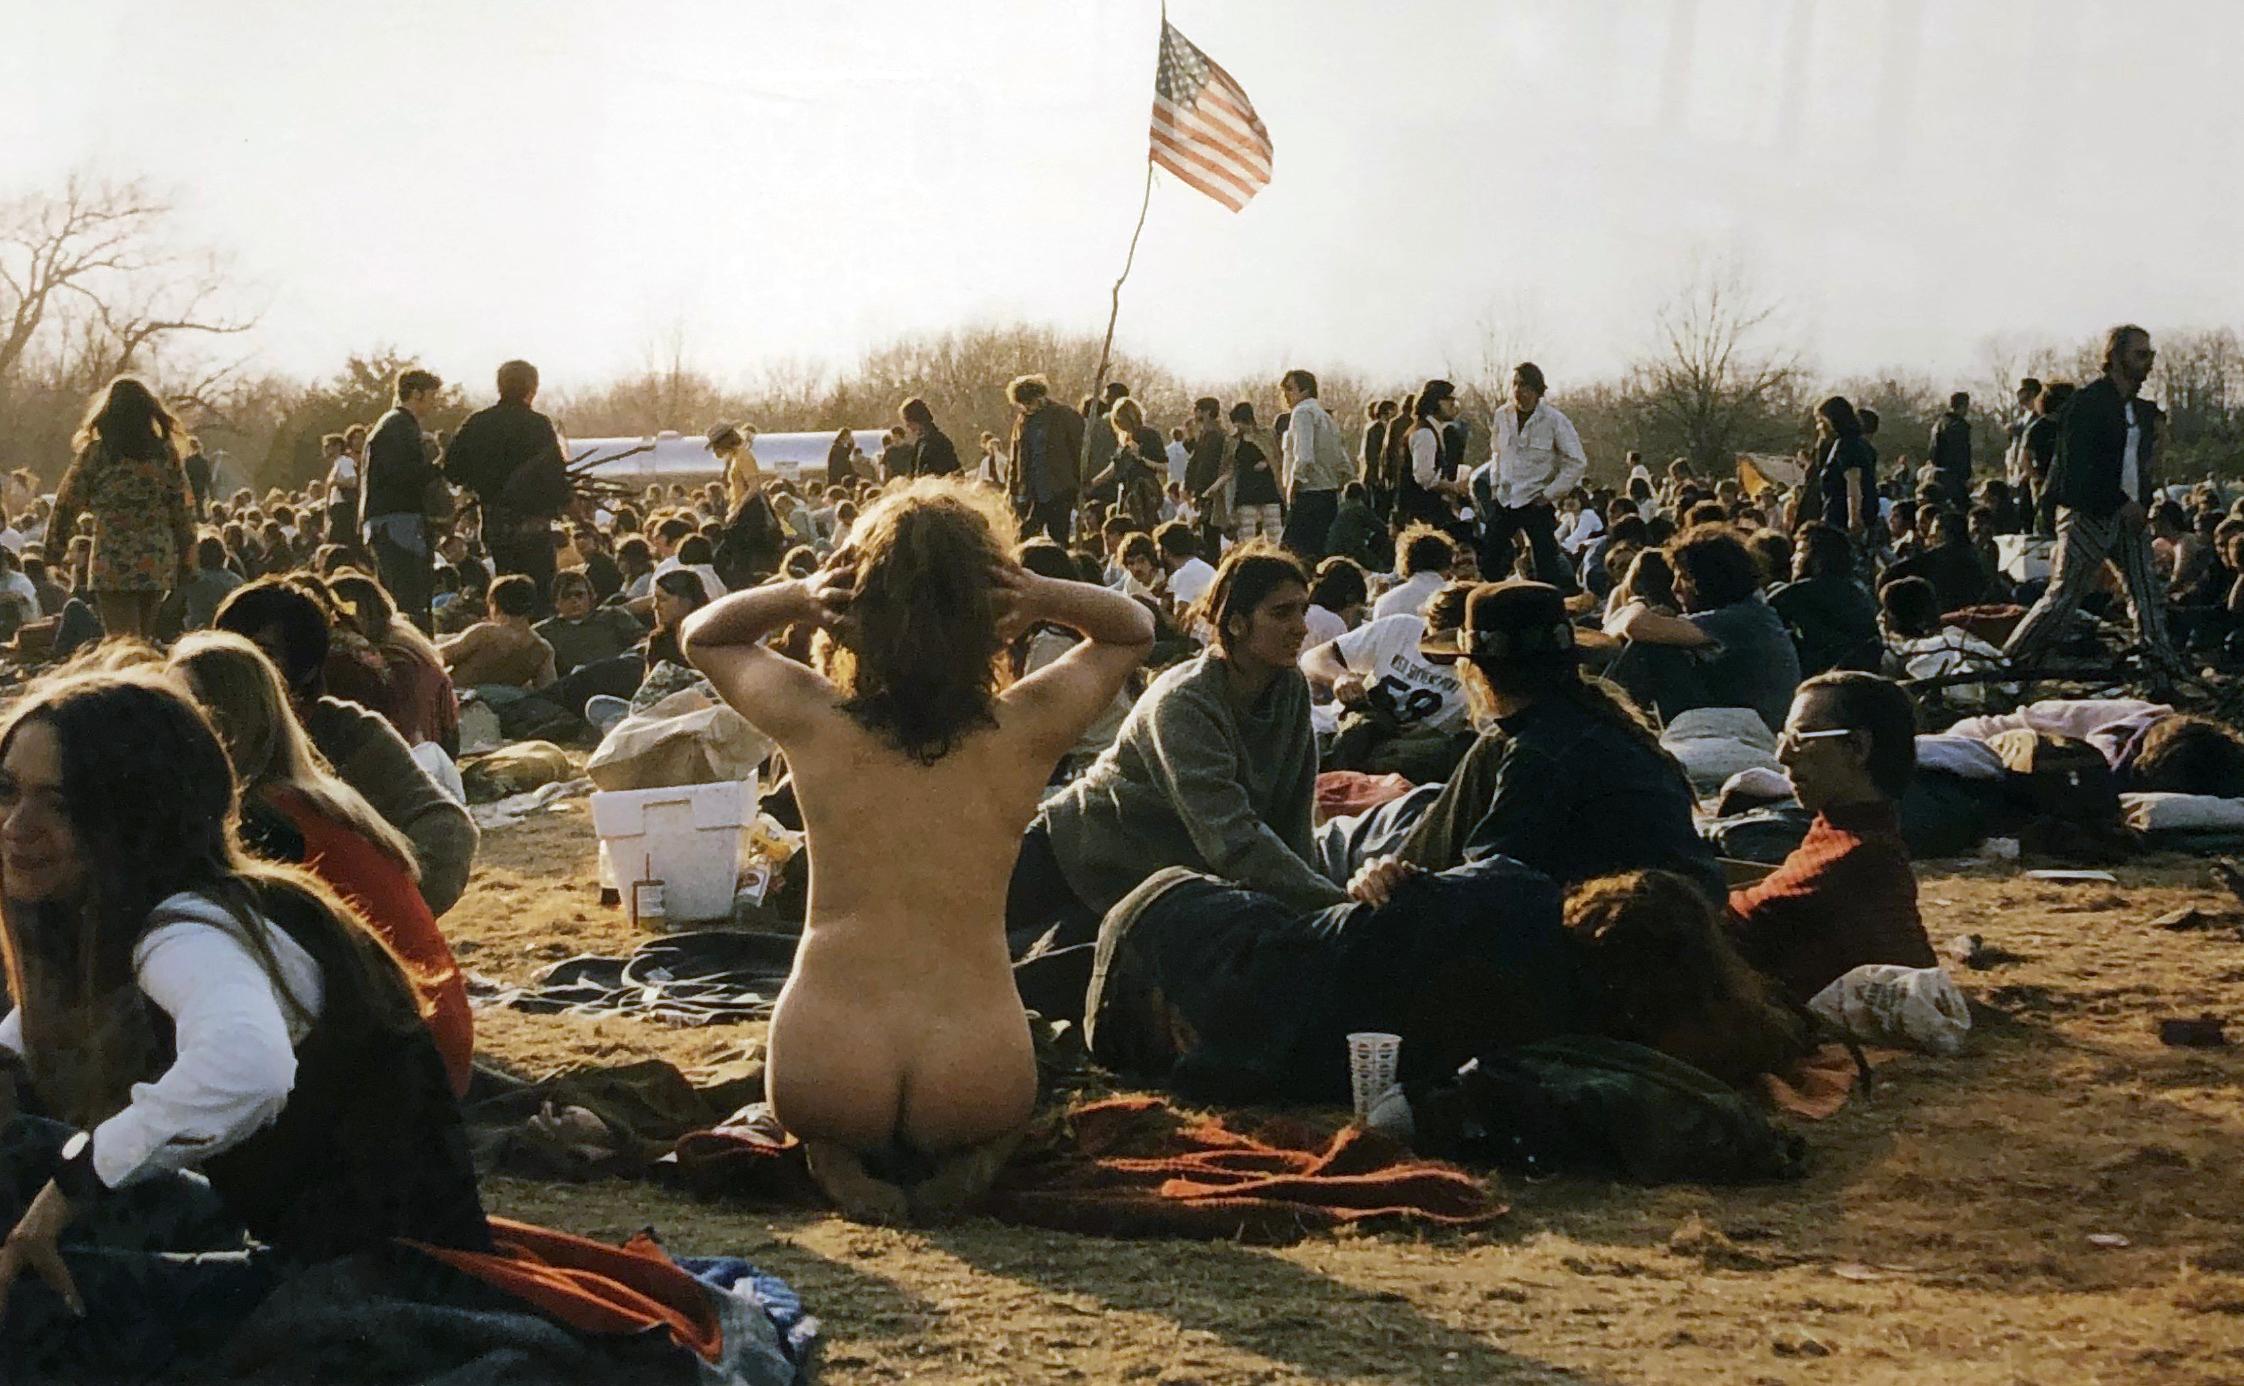 Art Shay Color Photograph - Nakedly Patriotic, 1970, Peaceful Gathering, Nude Female, Archival Pigment Print